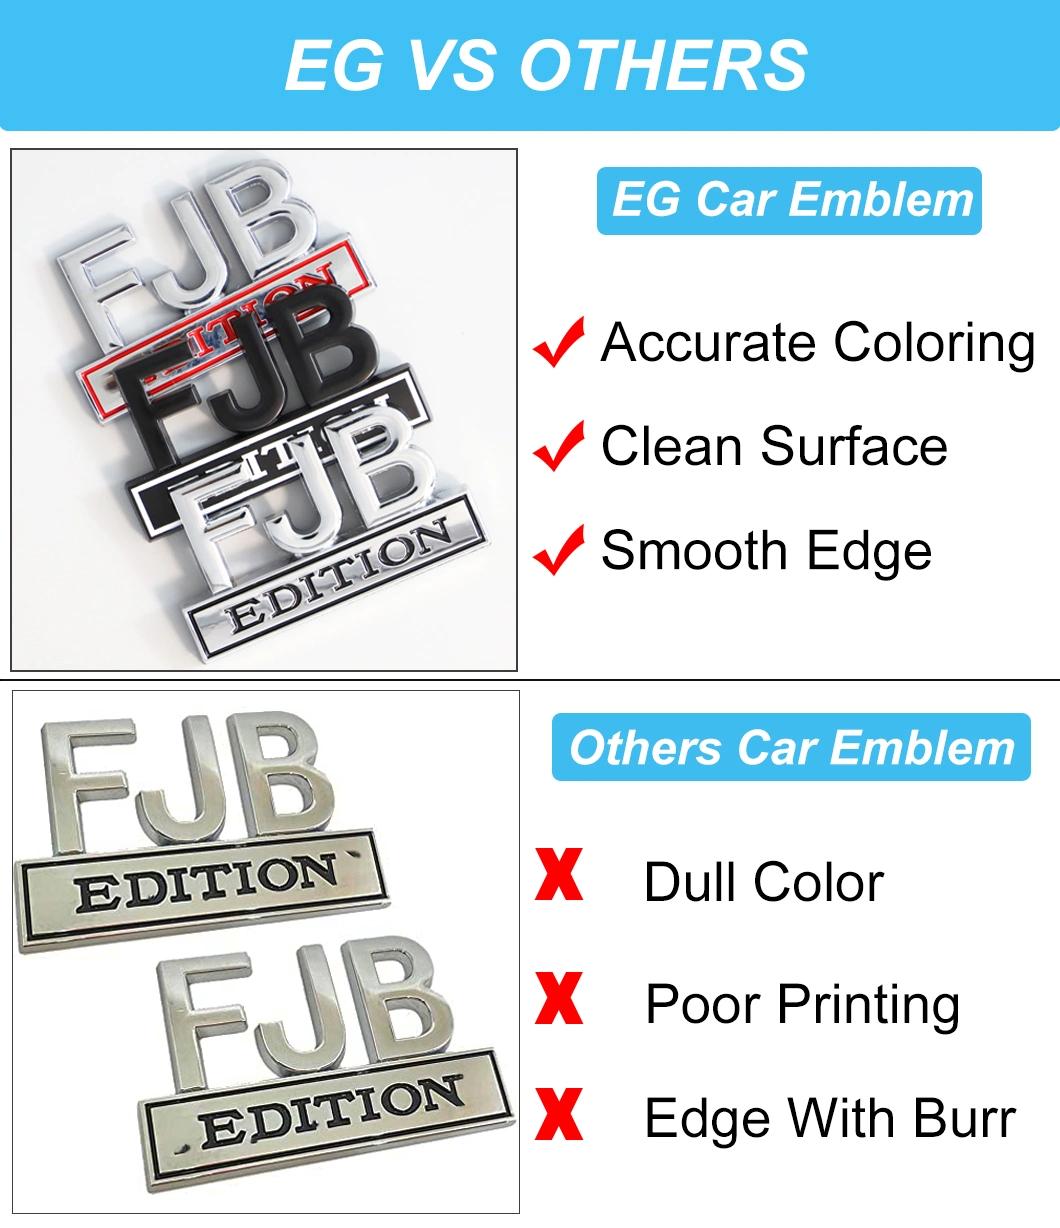 Fjb Car Emblem Badges with Over 25 Years Experience and ISO Certs